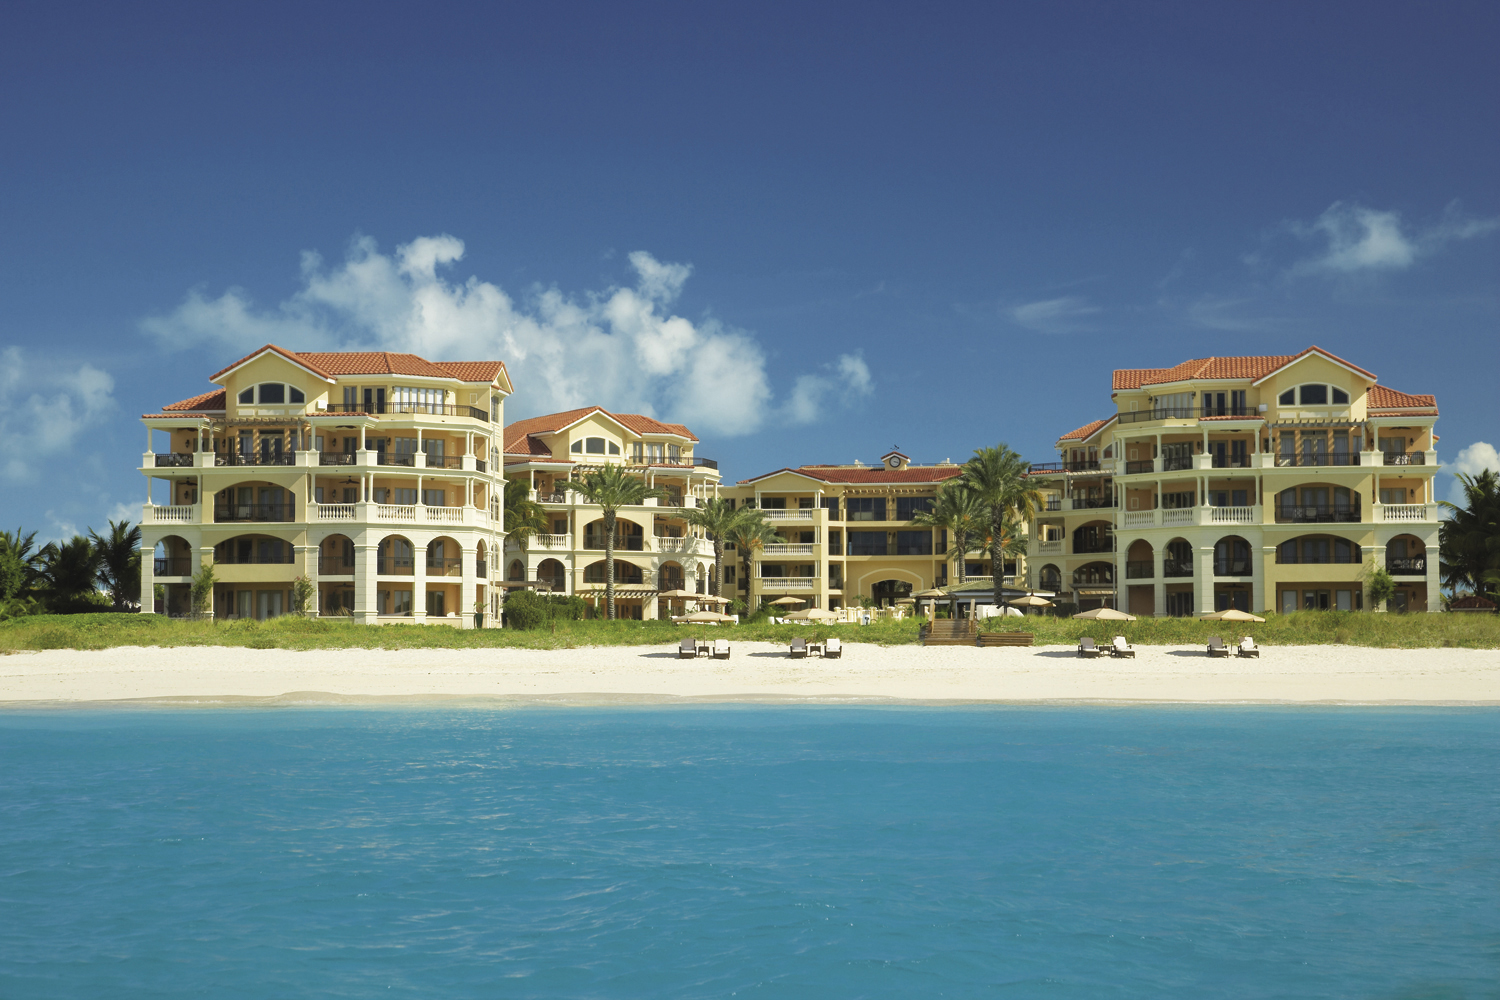 The Somerset on Grace Bay - Complimentary On-Site COVID-19 Testing for Guests at This 5 Star Turks and Caicos Resort